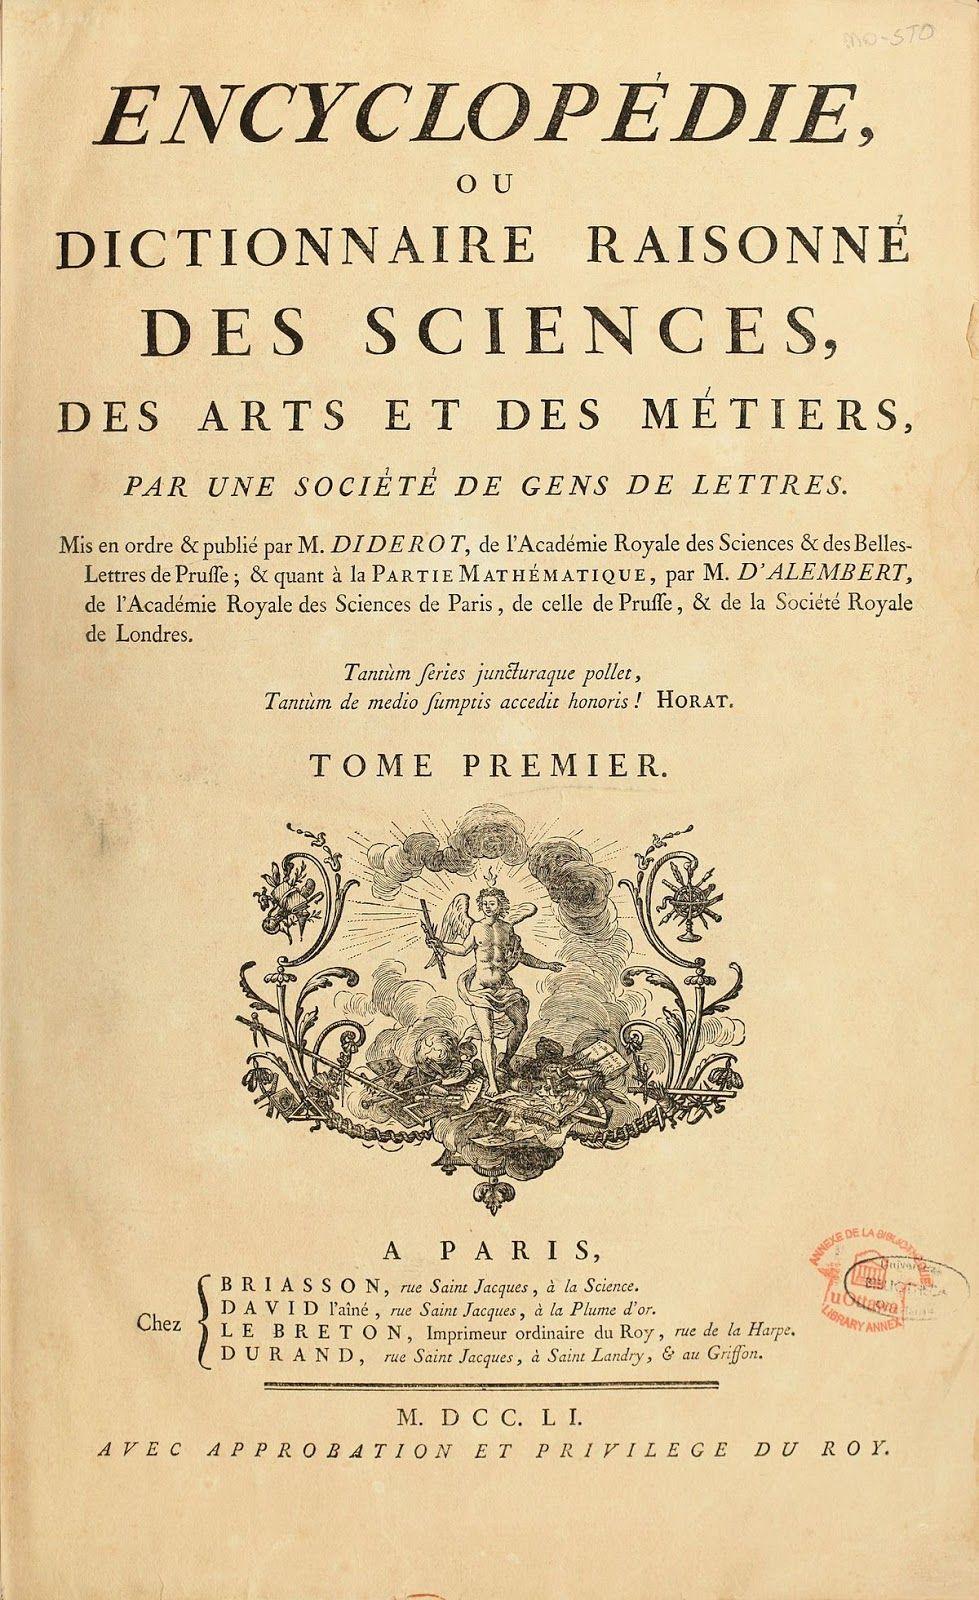 It widely read and extremely influential. Jean-Jacques Rousseau Contributed his articles on music to the Encyclopedia.